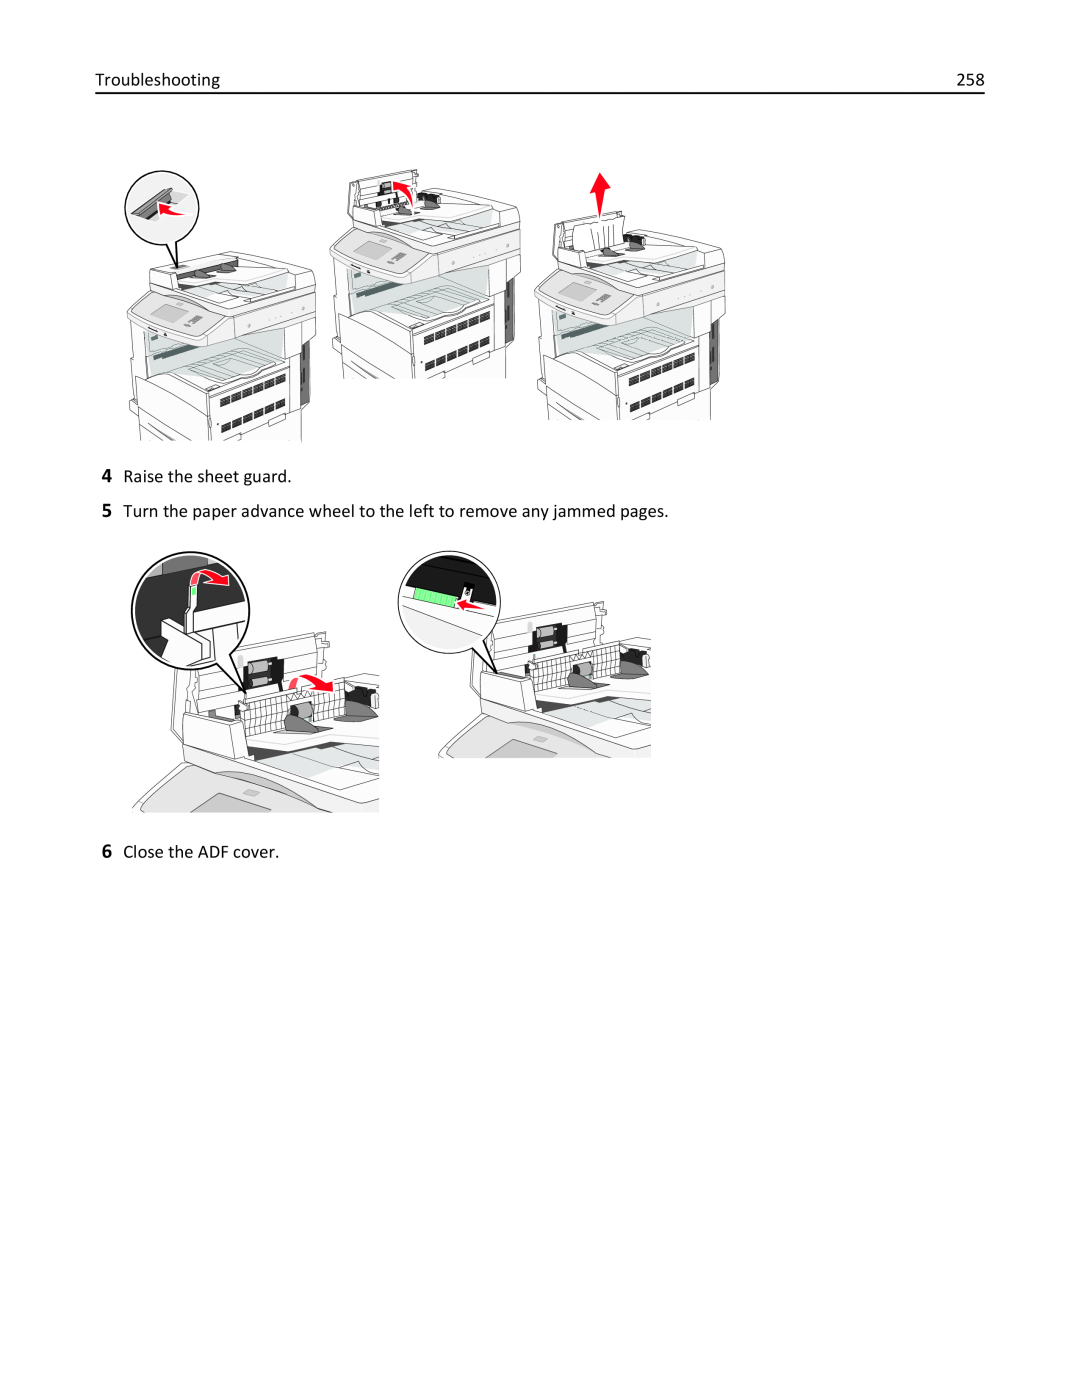 Lexmark X862DE Troubleshooting, Raise the sheet guard, Turn the paper advance wheel to the left to remove any jammed pages 